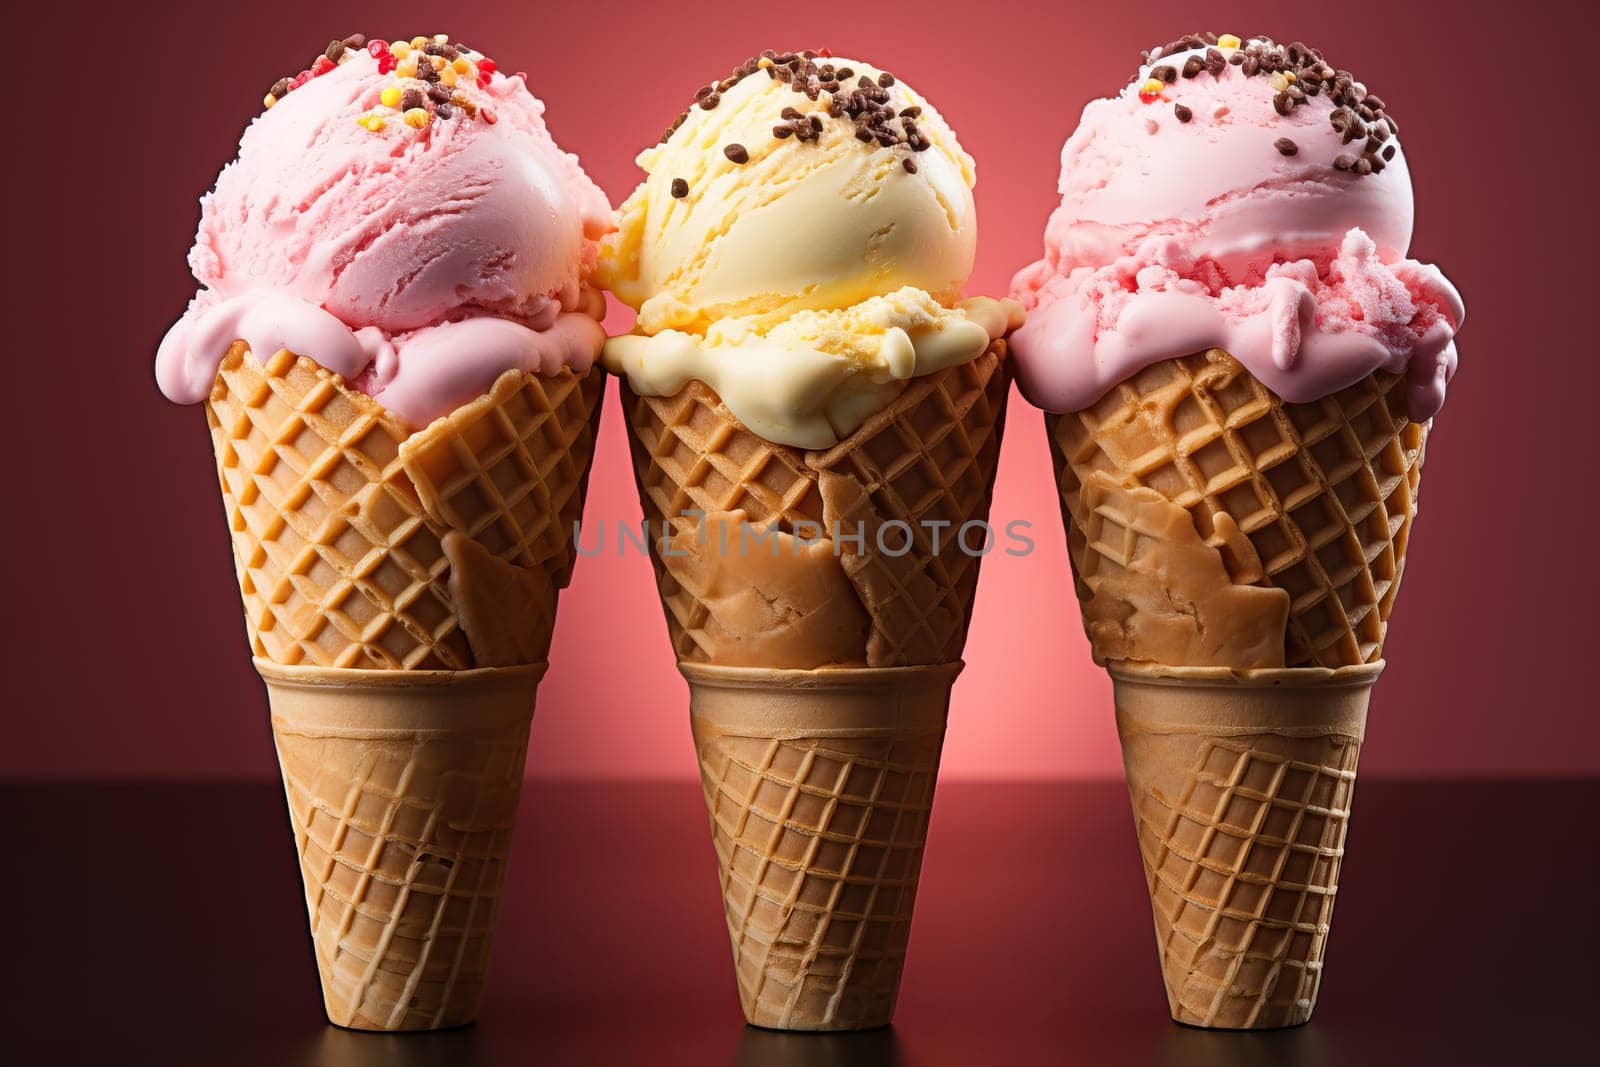 Three ice creams with three different flavors of strawberry, vanilla and banana on a bright background, ice cream in a waffle cup.